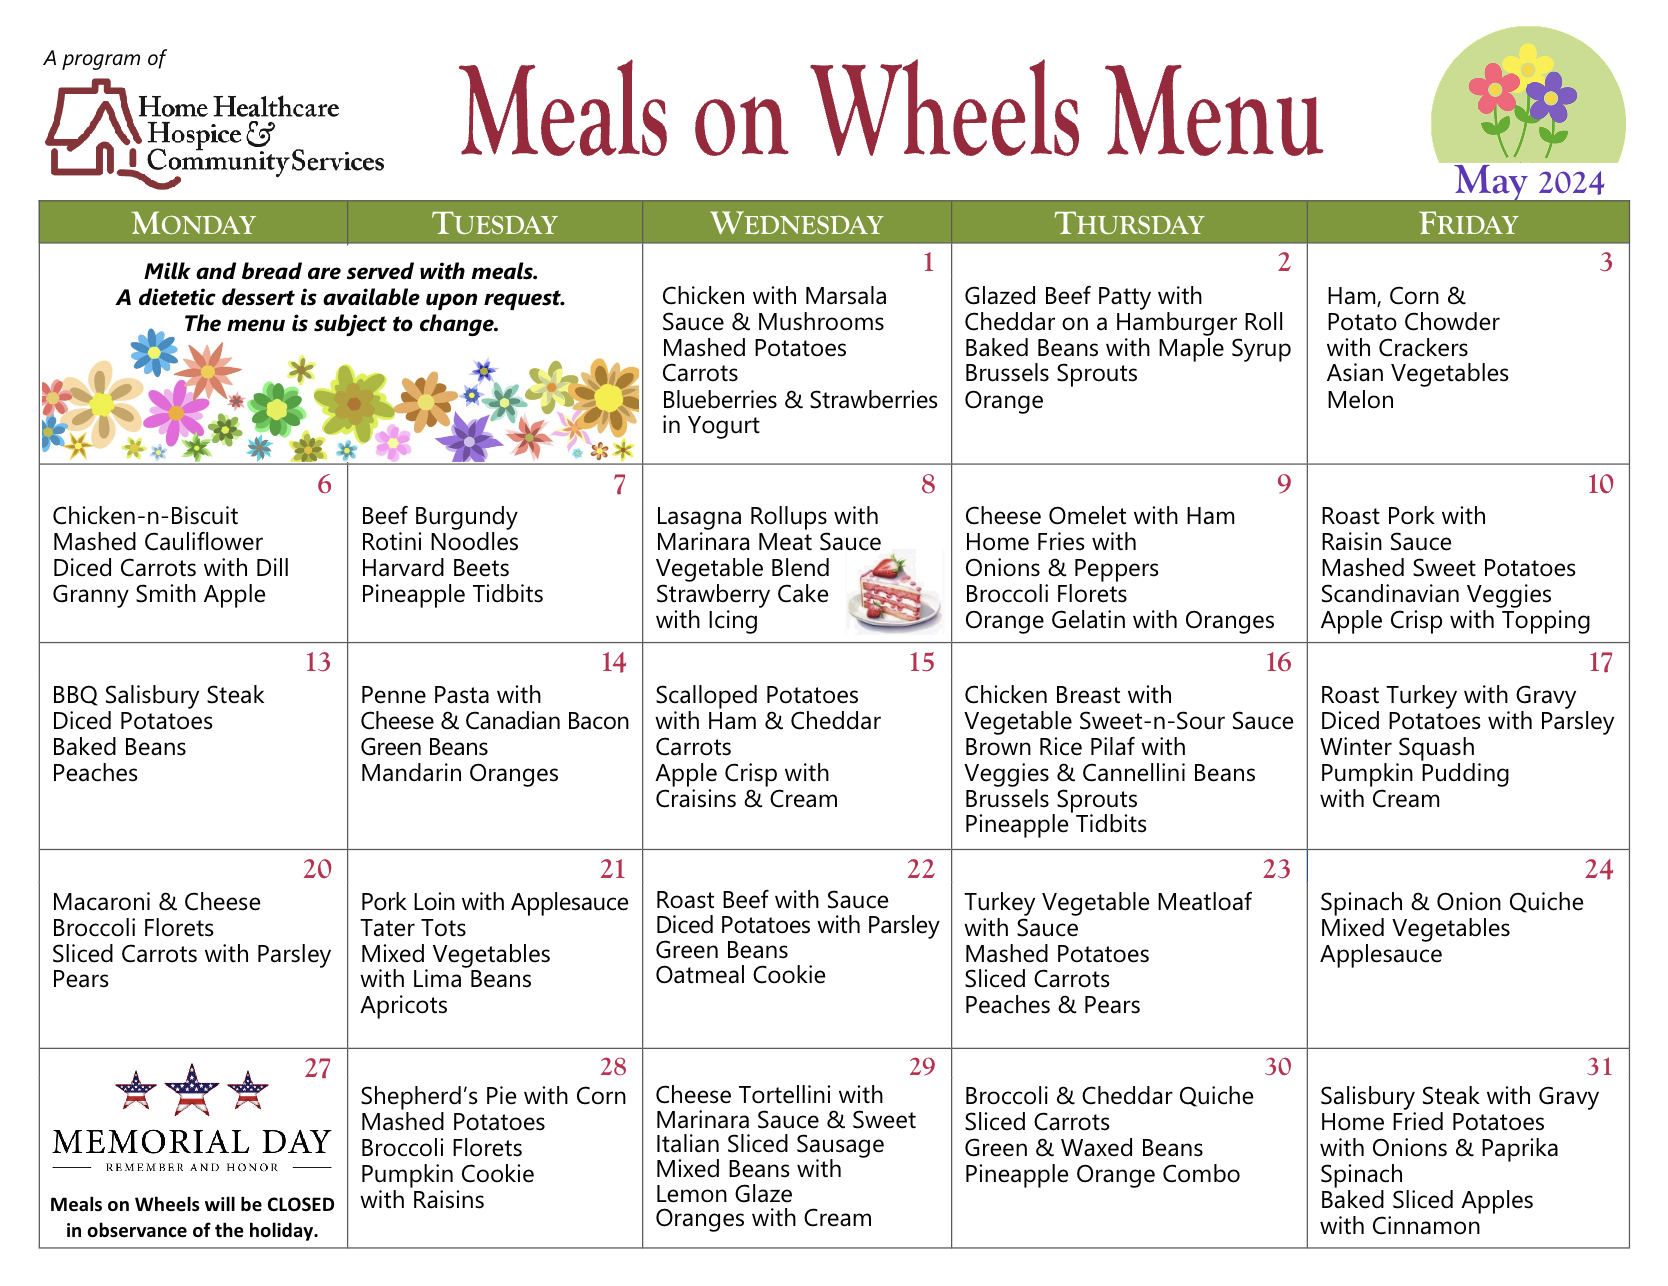 Meals On Wheels Menu for May 2024